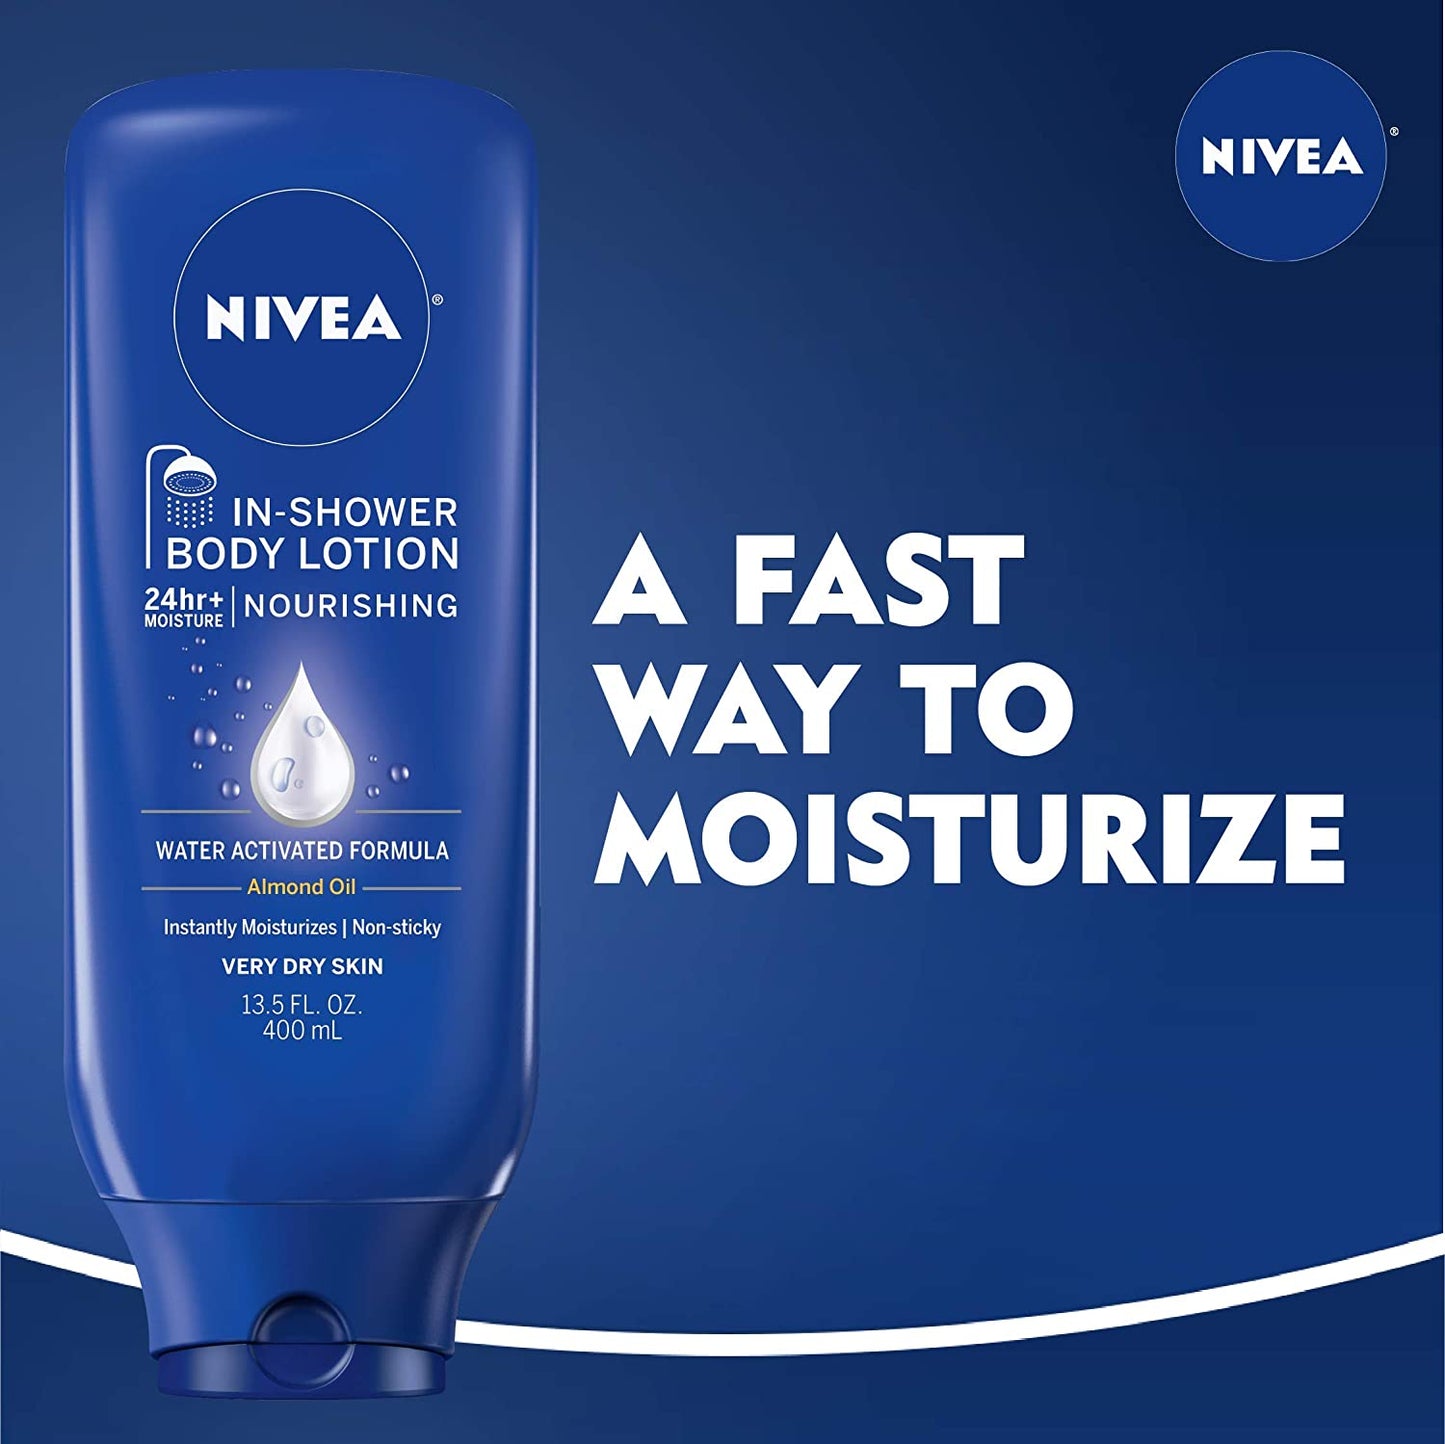 Nivea In-Shower Body Lotion Nourishing 24 hr+ Moisture Water Activated Formula Almond Oil 400 mL